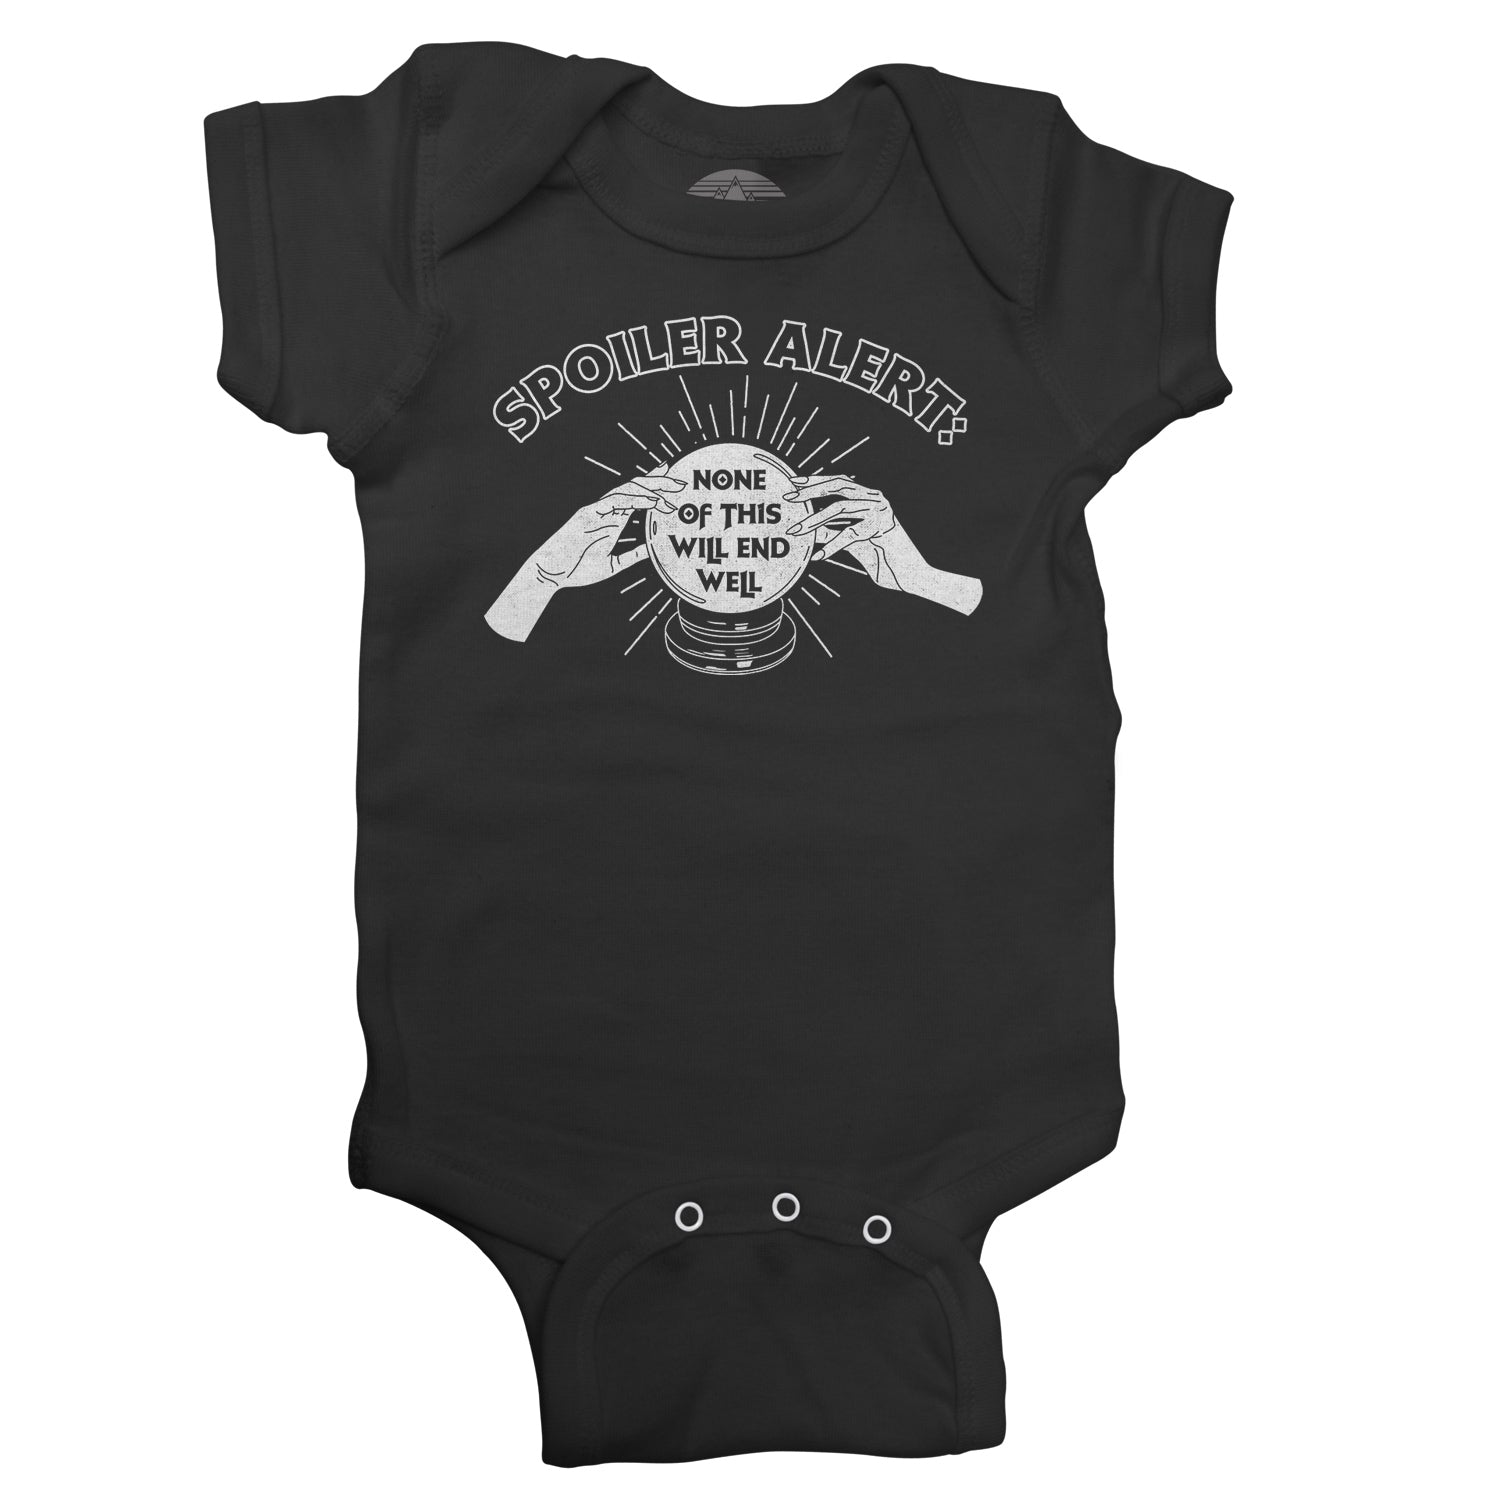 Spoiler Alert None of This Will End Well Infant Bodysuit - Unisex Fit